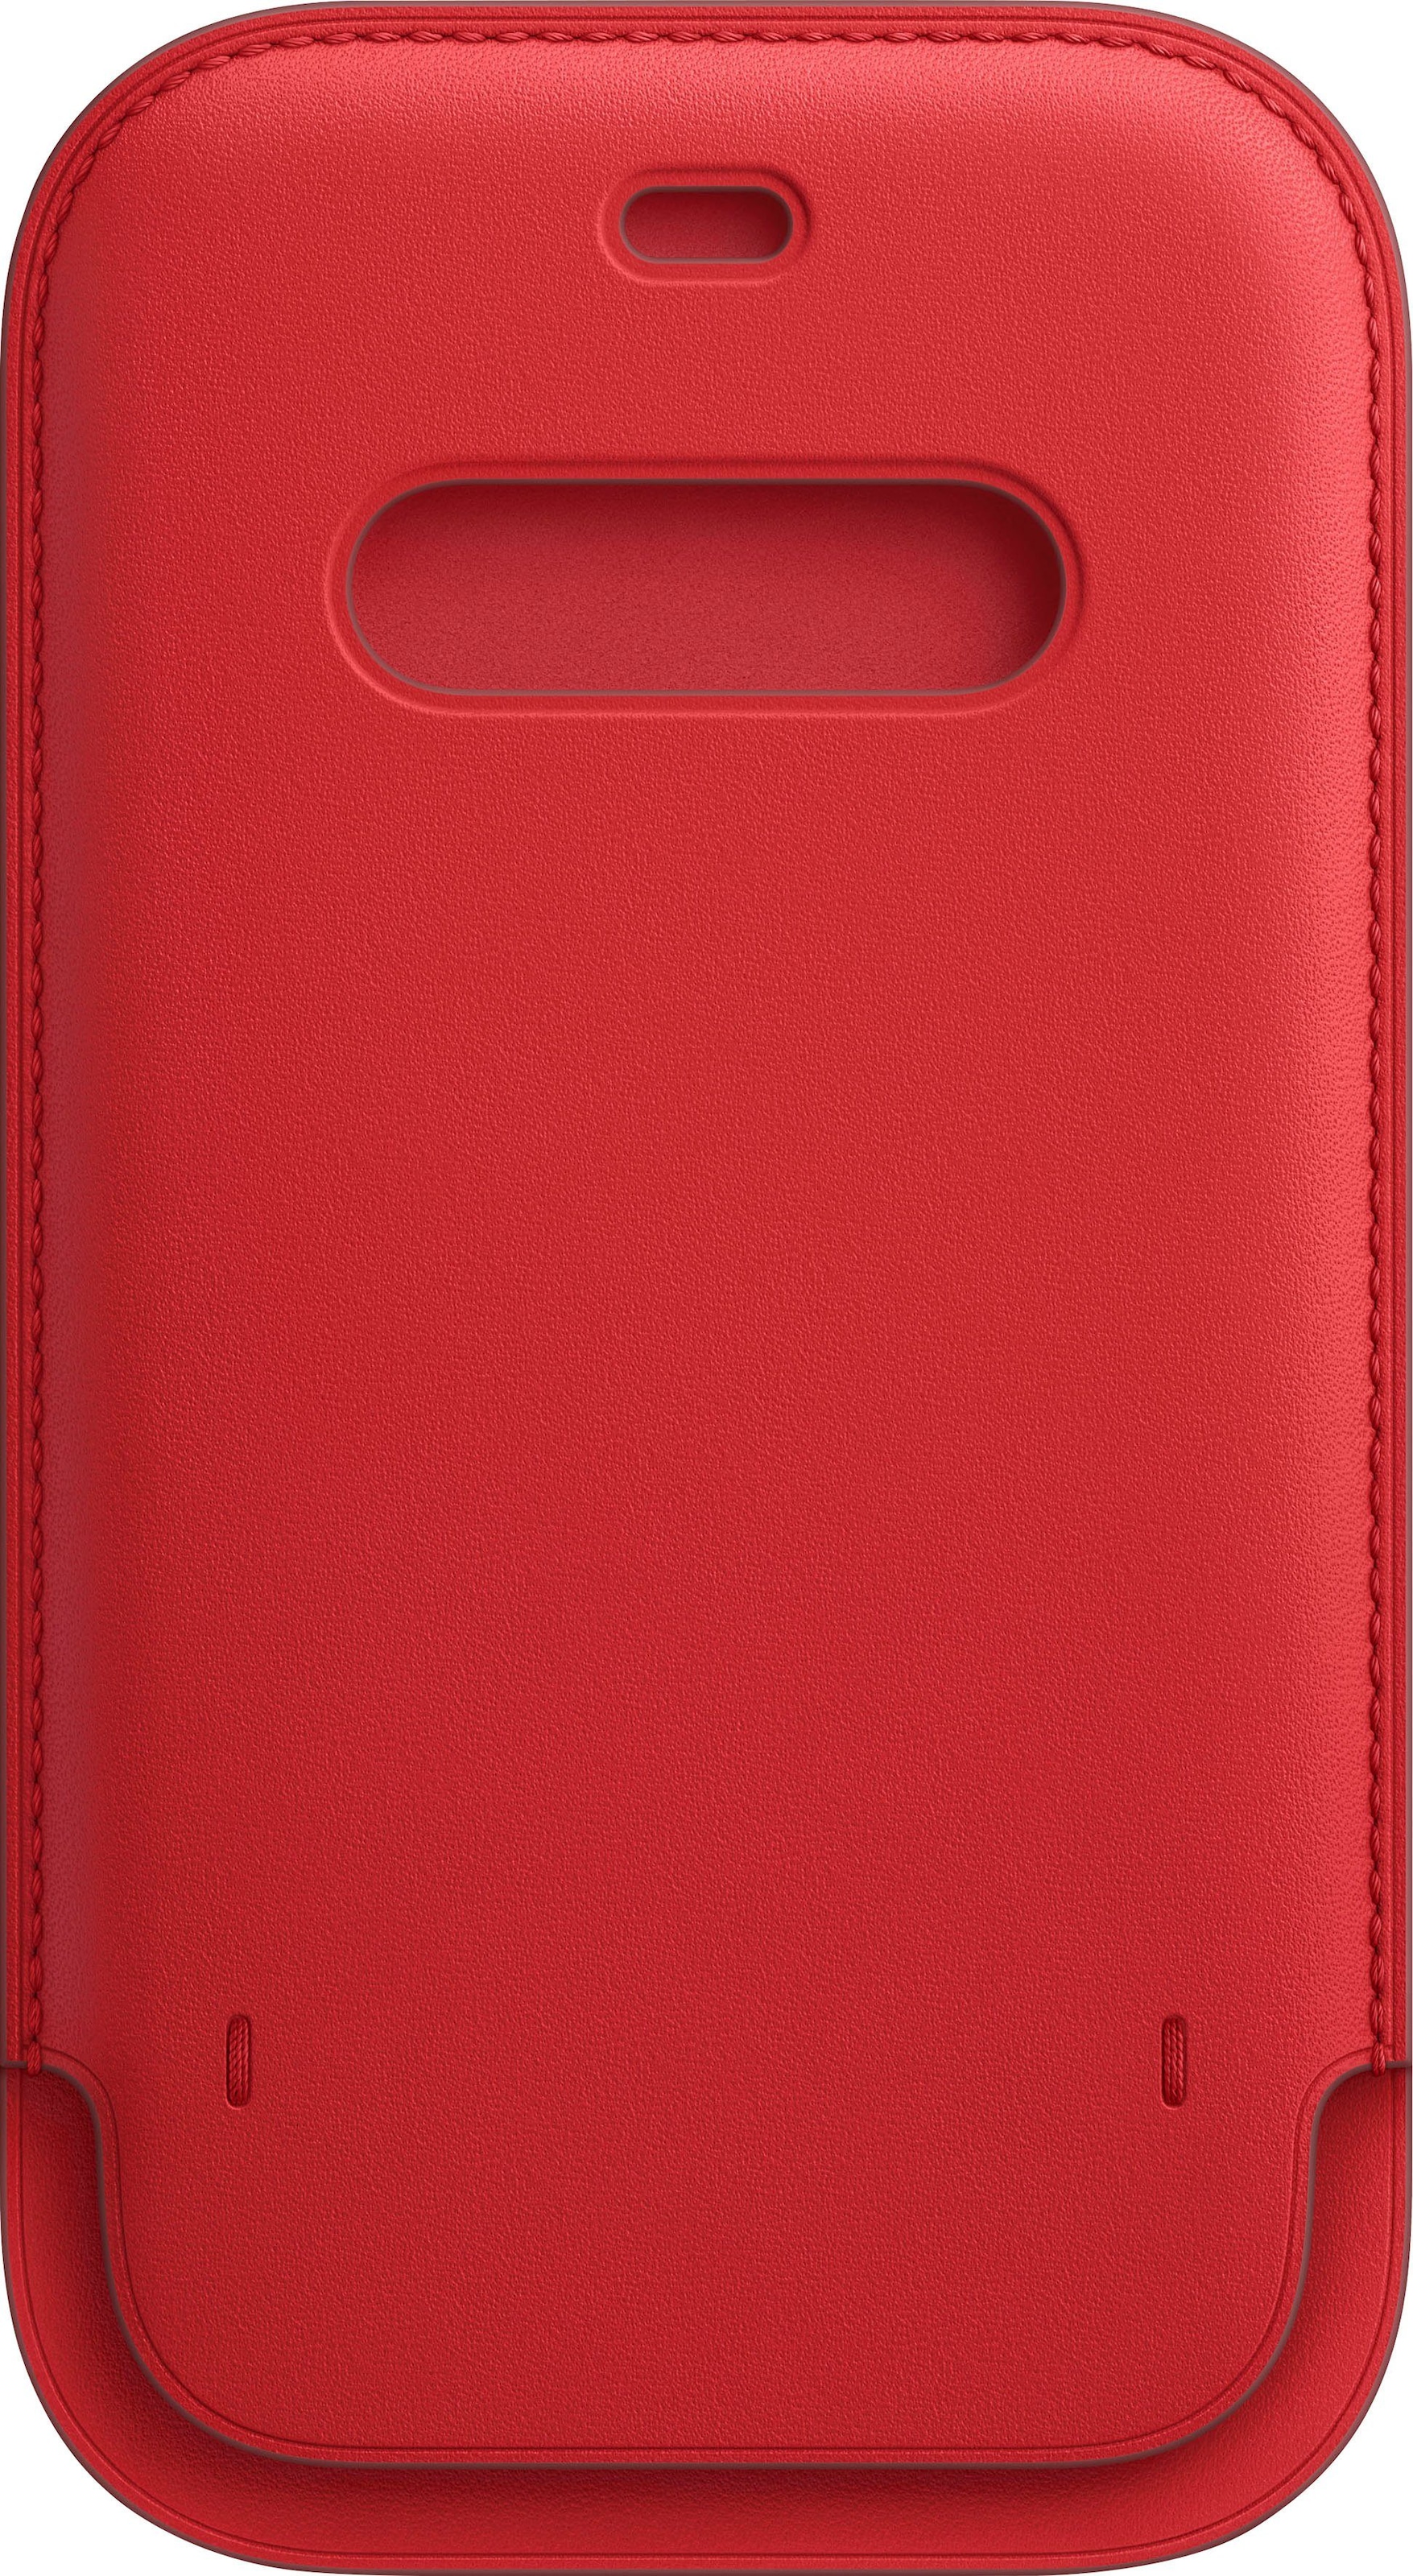 Apple Smartphone-Hülle »iPhone 12/12 Pro Leather Sleeve«, iPhone 12 Pro-iPhone 12